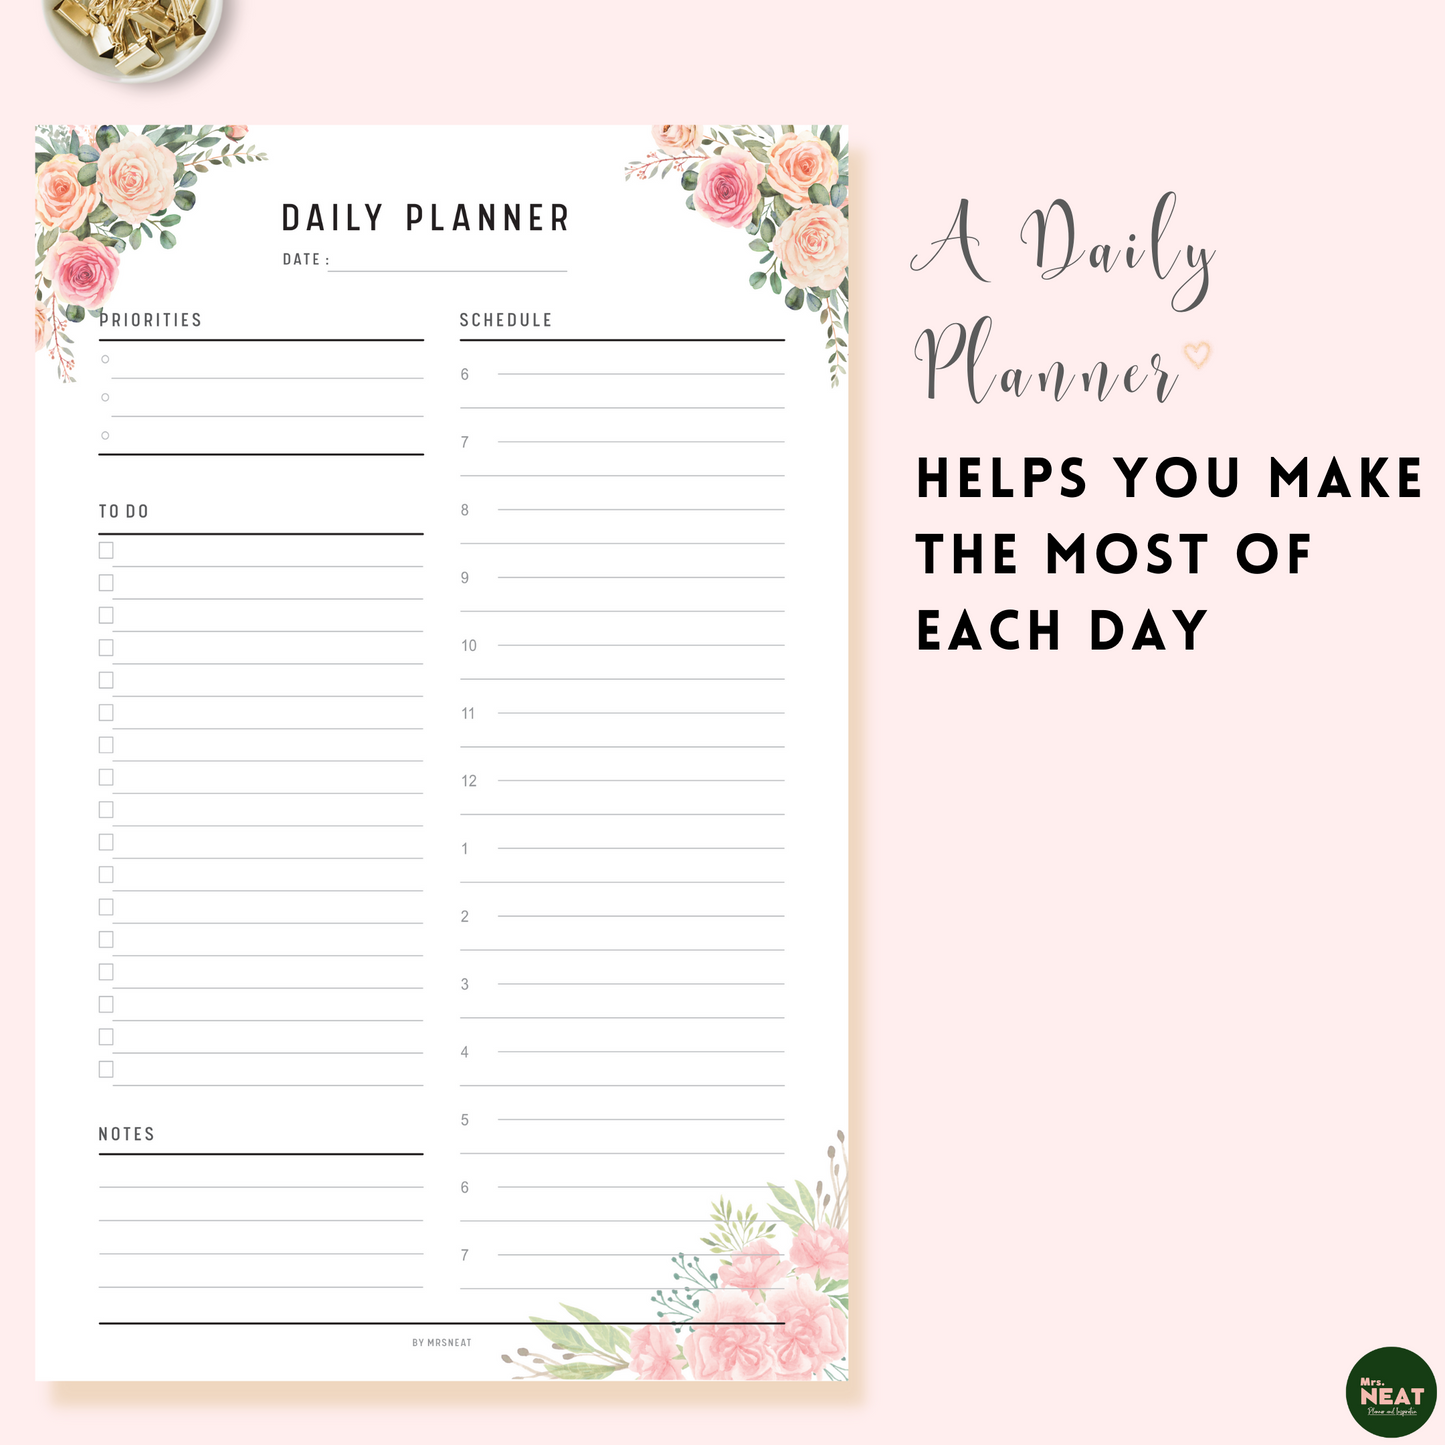 Daily Planner Printable in Cute and Minimalist Design with Pink Flower on the corner